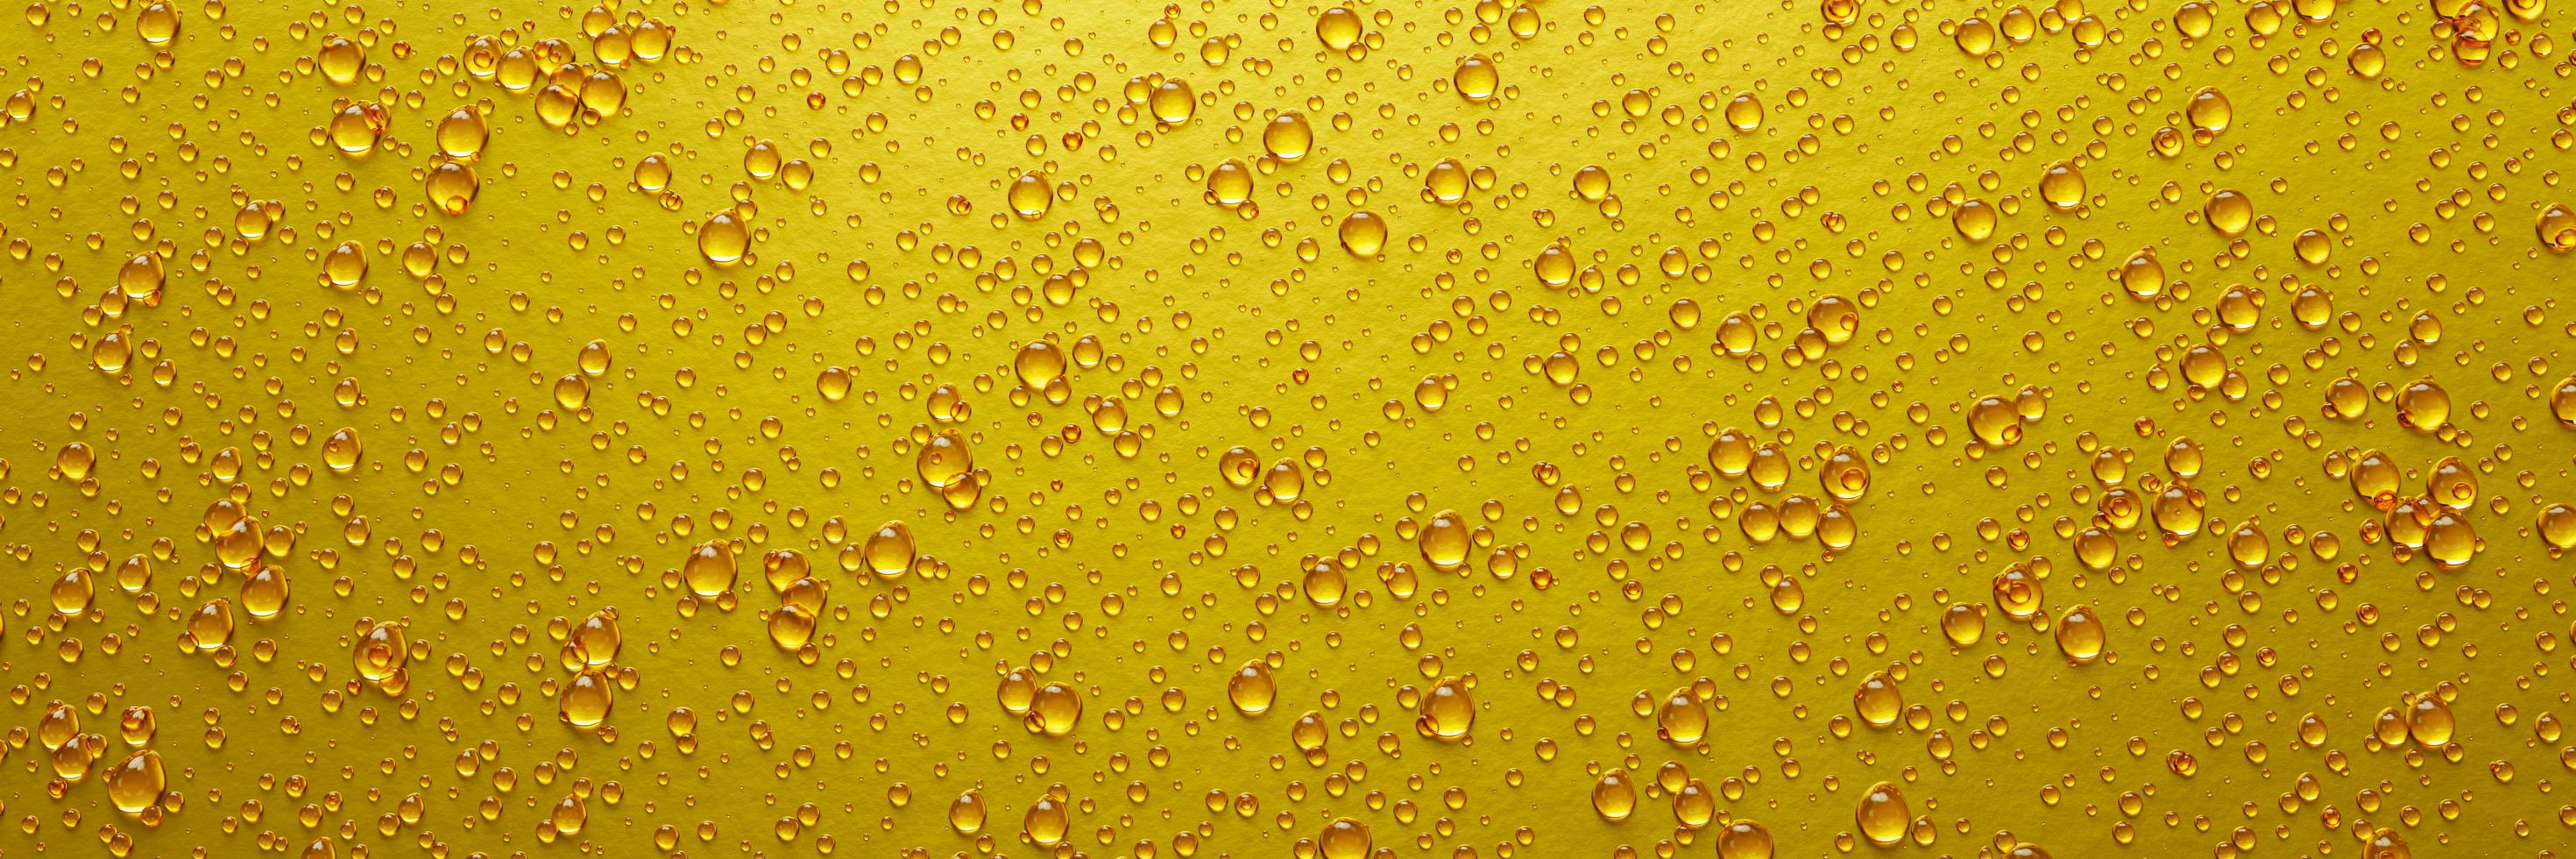 A lot of water droplets On metal or metallic surfaces in yellow and gold shades for mobile smartphone background or wallpaper. 3D Rendering. photo